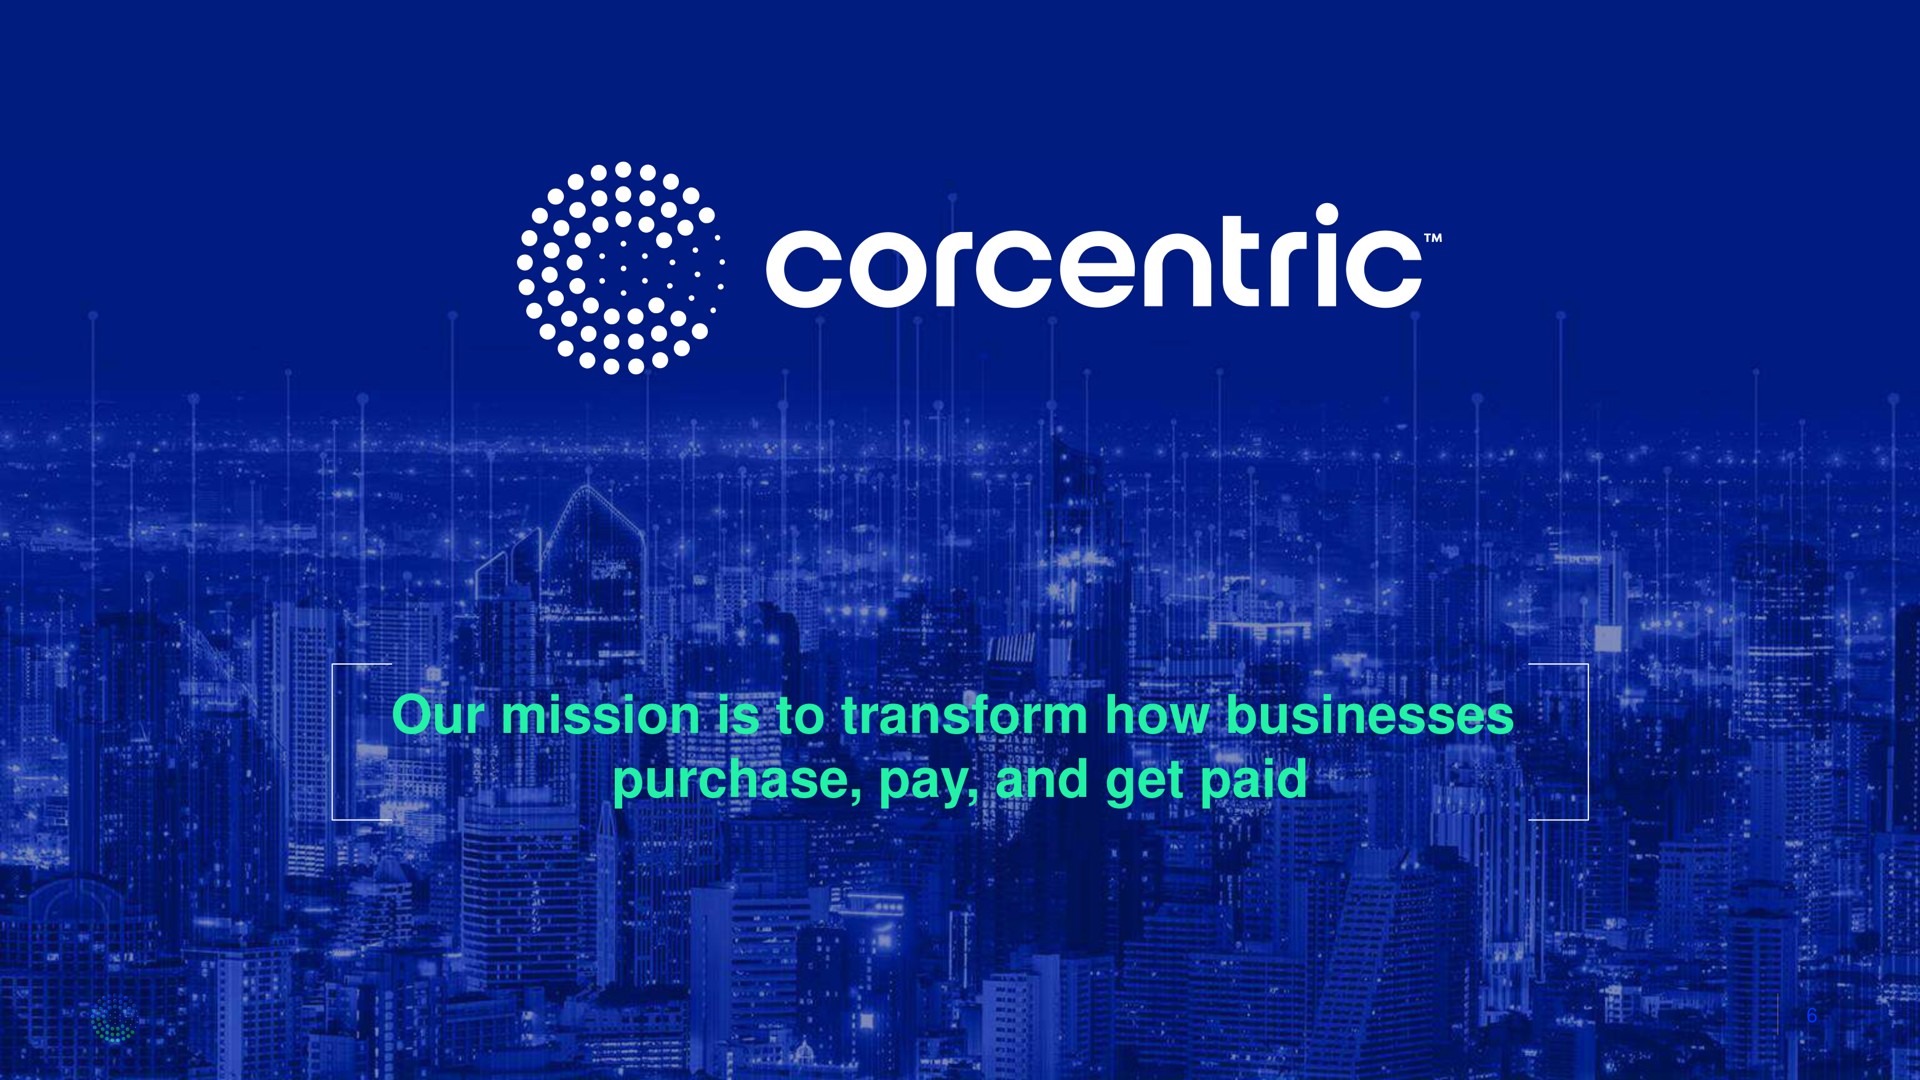 our mission is to transform how businesses purchase pay and get paid melt ere me | Corecentric